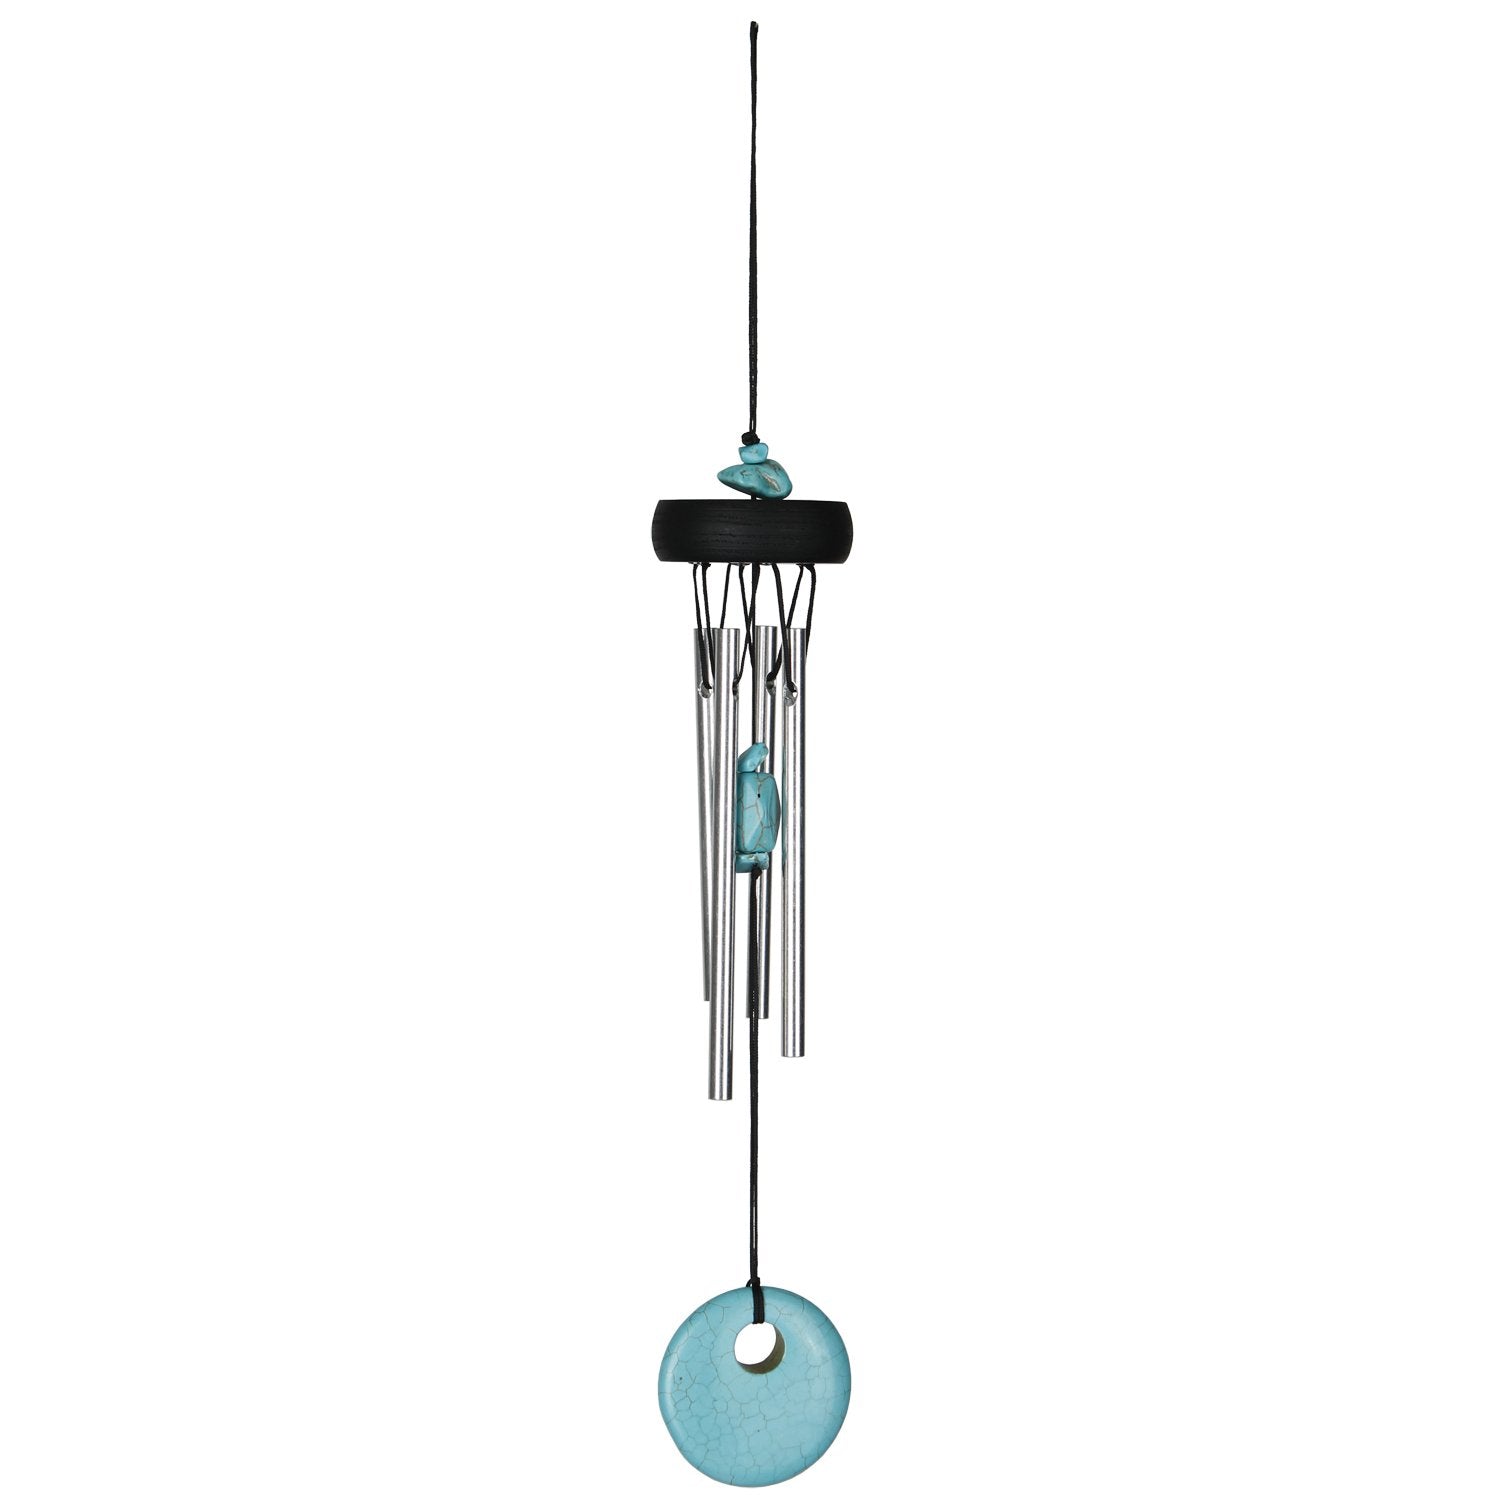 Precious Stones Chime - Turquoise full product image